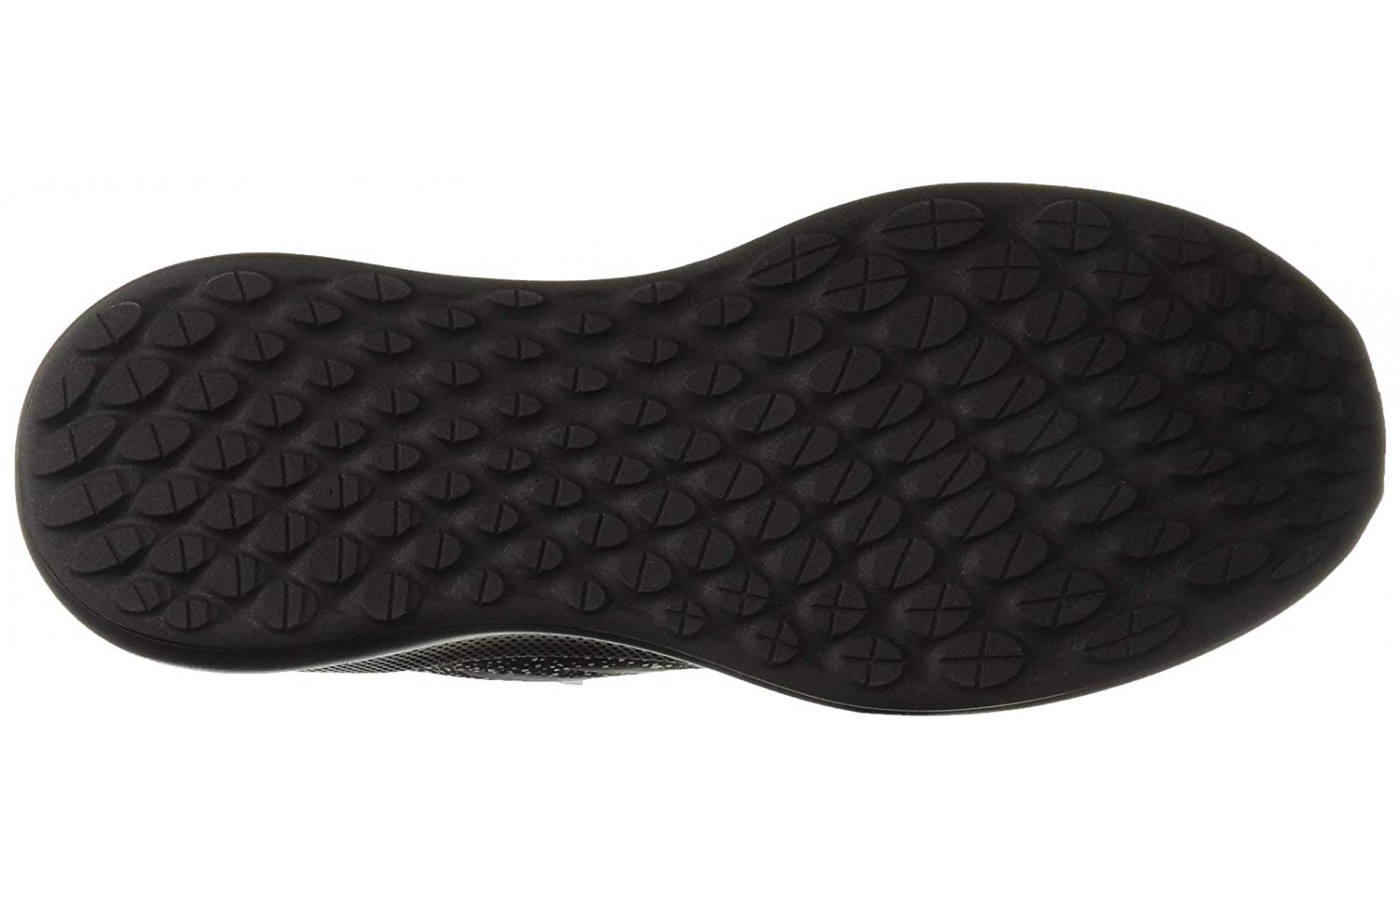 Grippy outsole on Adidas Purebounce+